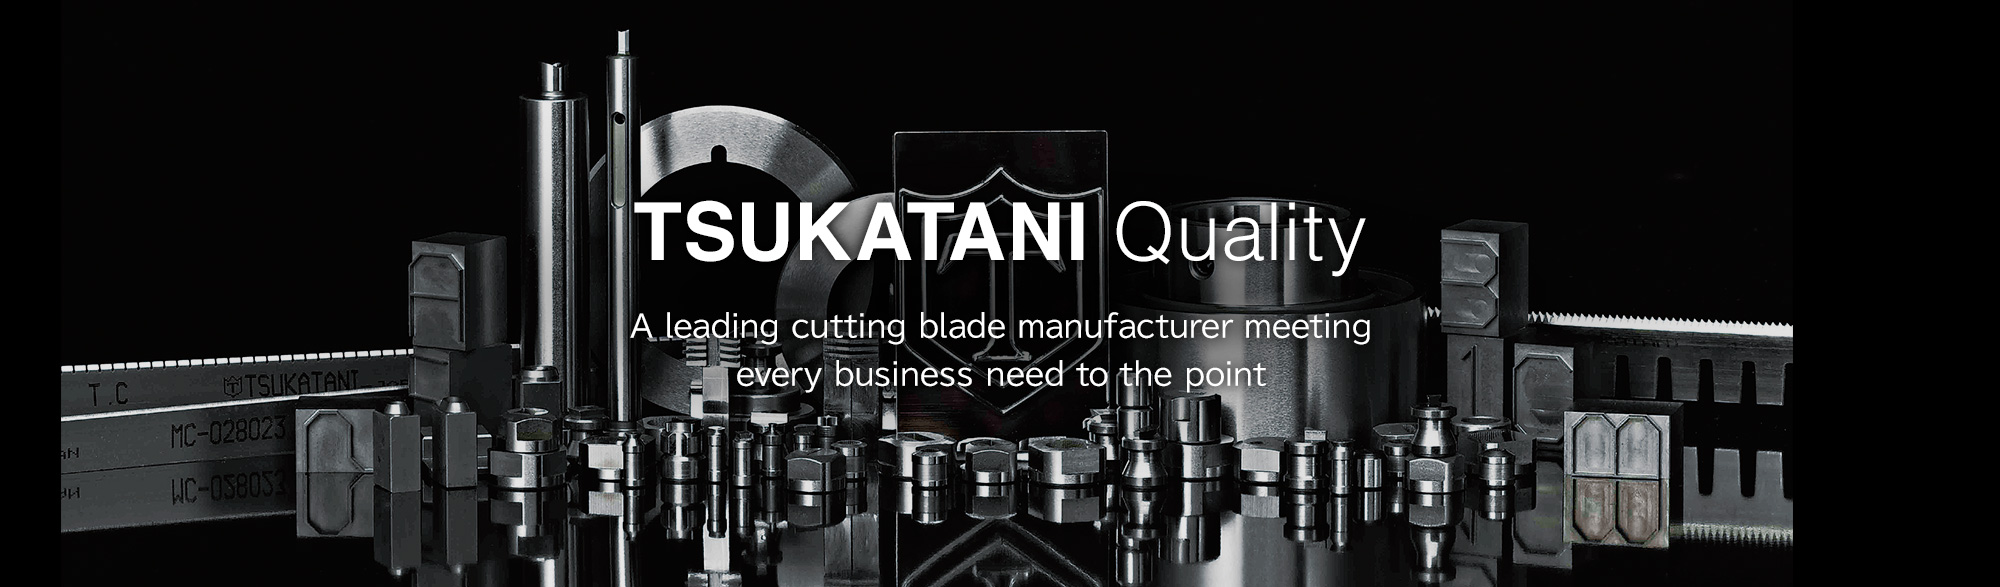 TSUKATANI Quality  A leading cutting blade manufacturer meeting every business need to the point